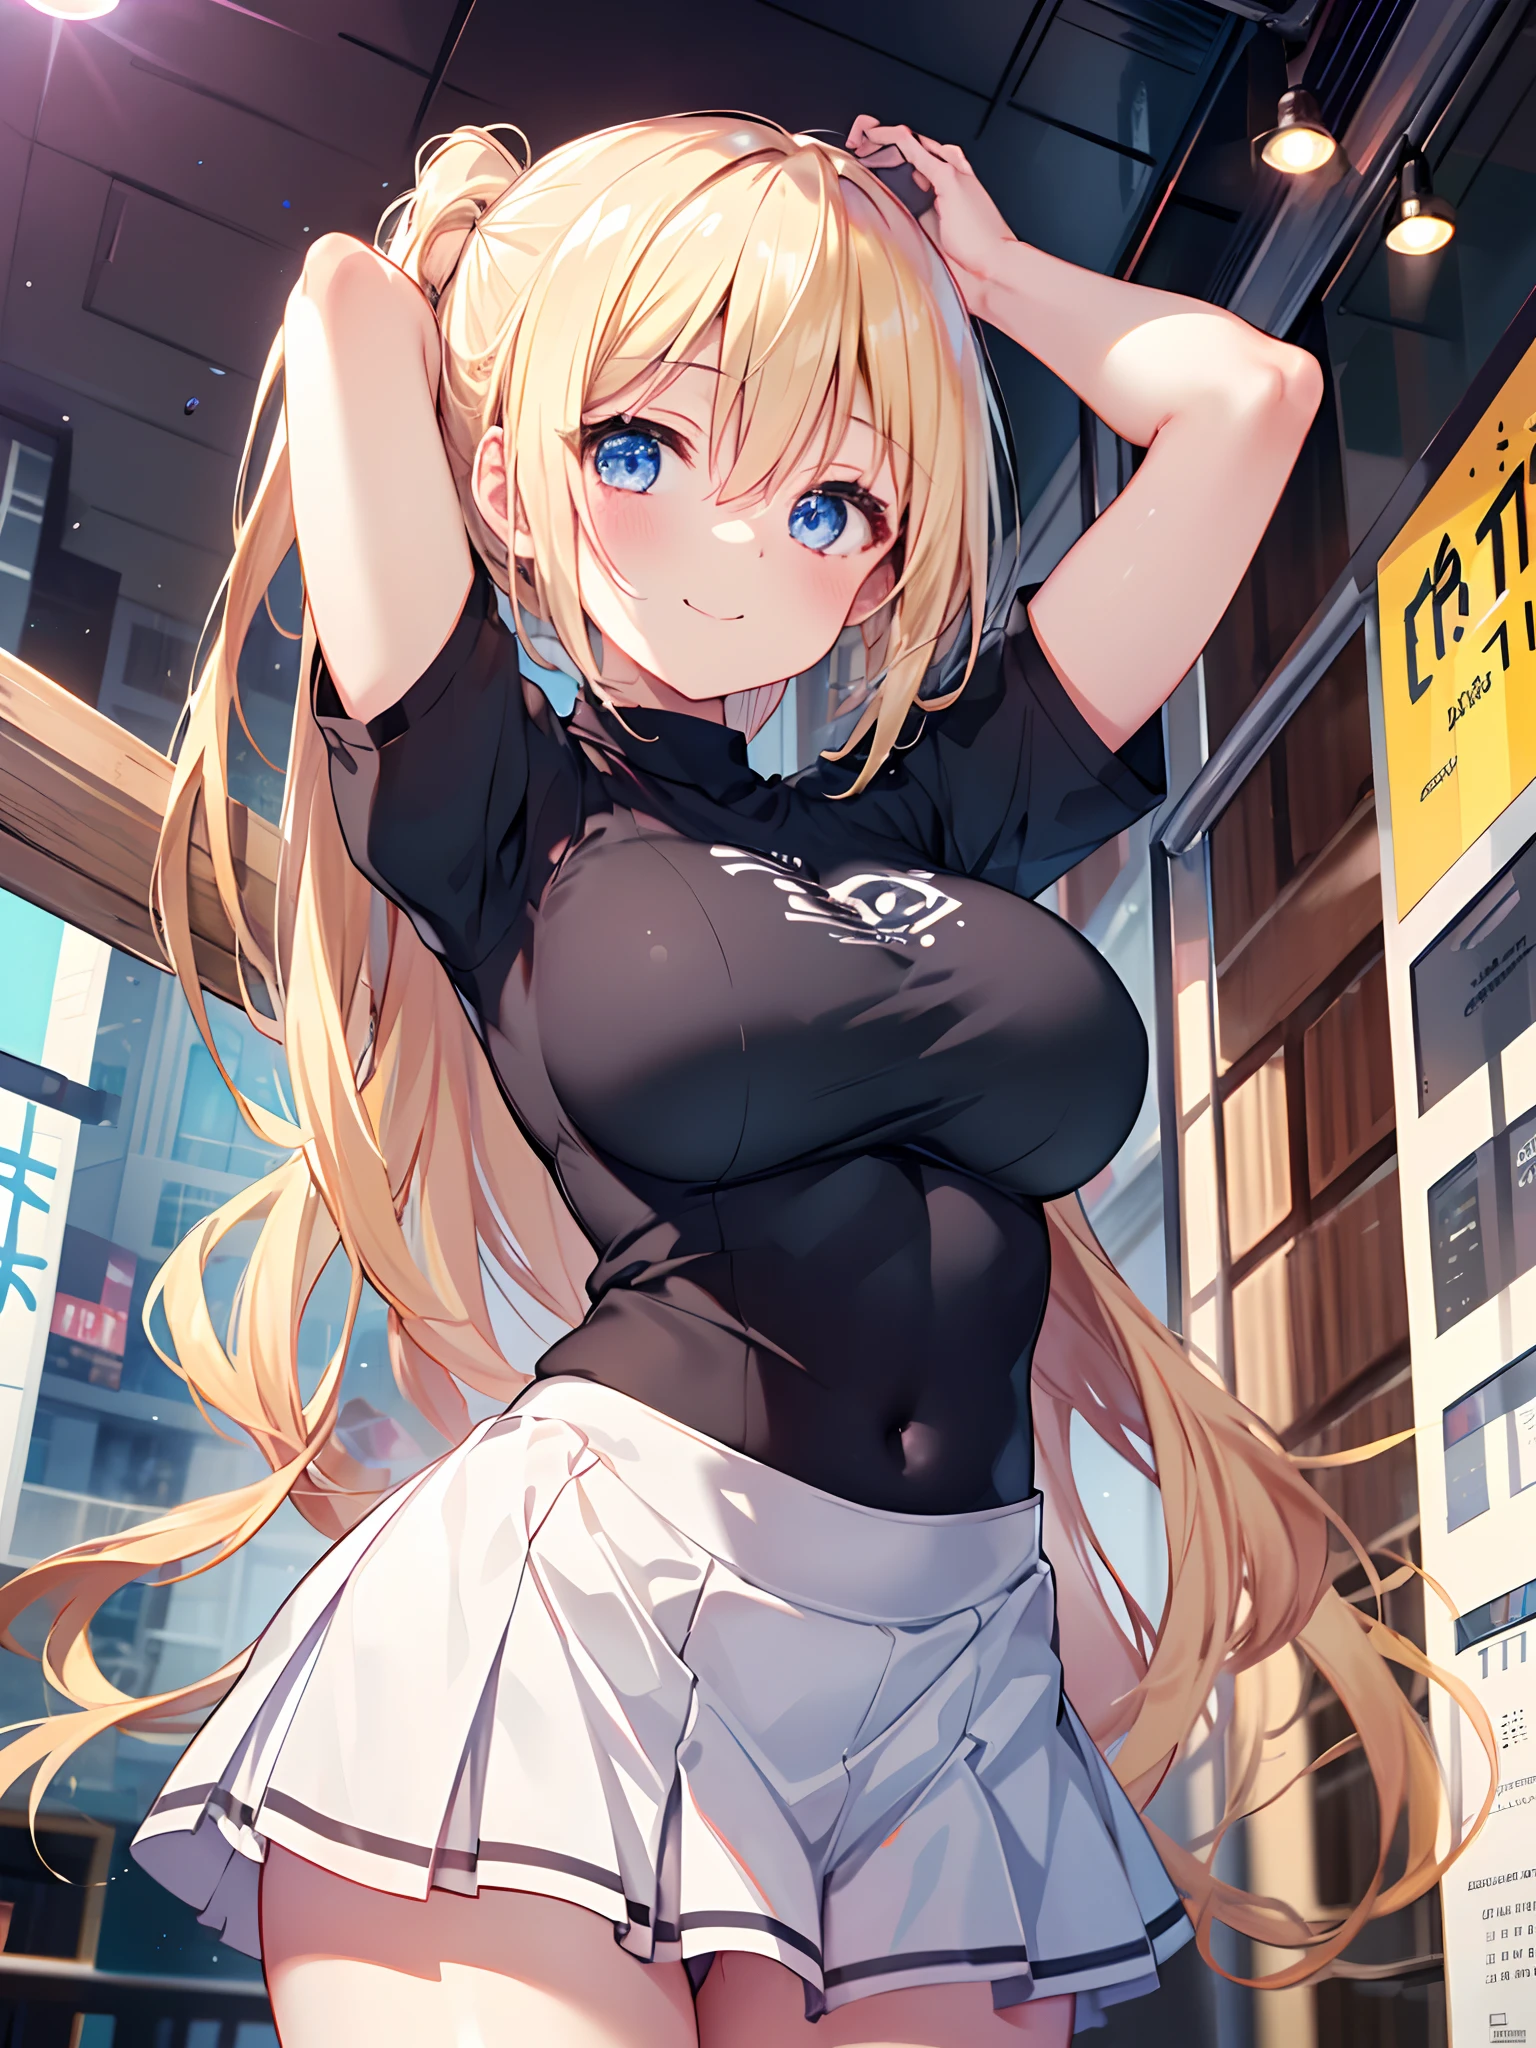 1girl in, (Chiquita:1.2), Kaho Hyuga, a blond, Twin-tailed,

Black shirt, White skirt, large boob,  
(Best Quality, hight resolution, 4K, Detailed Lighting, Shaders, perfect anatomia:1.2), 
(Focus:1.2), 
Arms up, 
Smile, blush, 
Looking at Viewer, From below, 
Cafe Background,